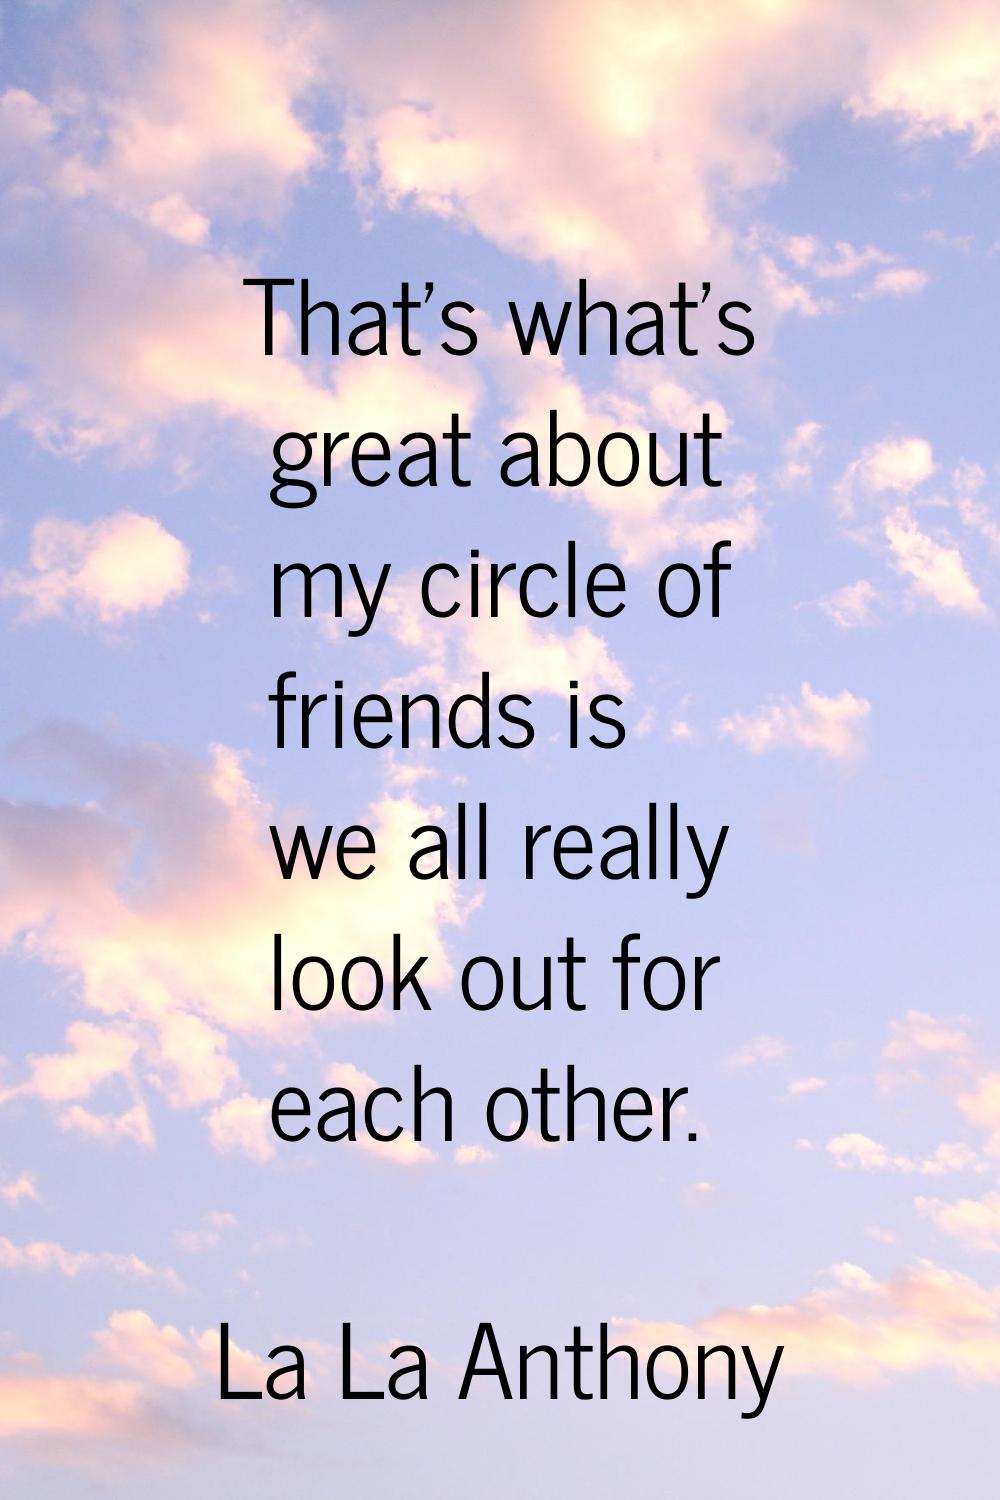 That's what's great about my circle of friends is we all really look out for each other.